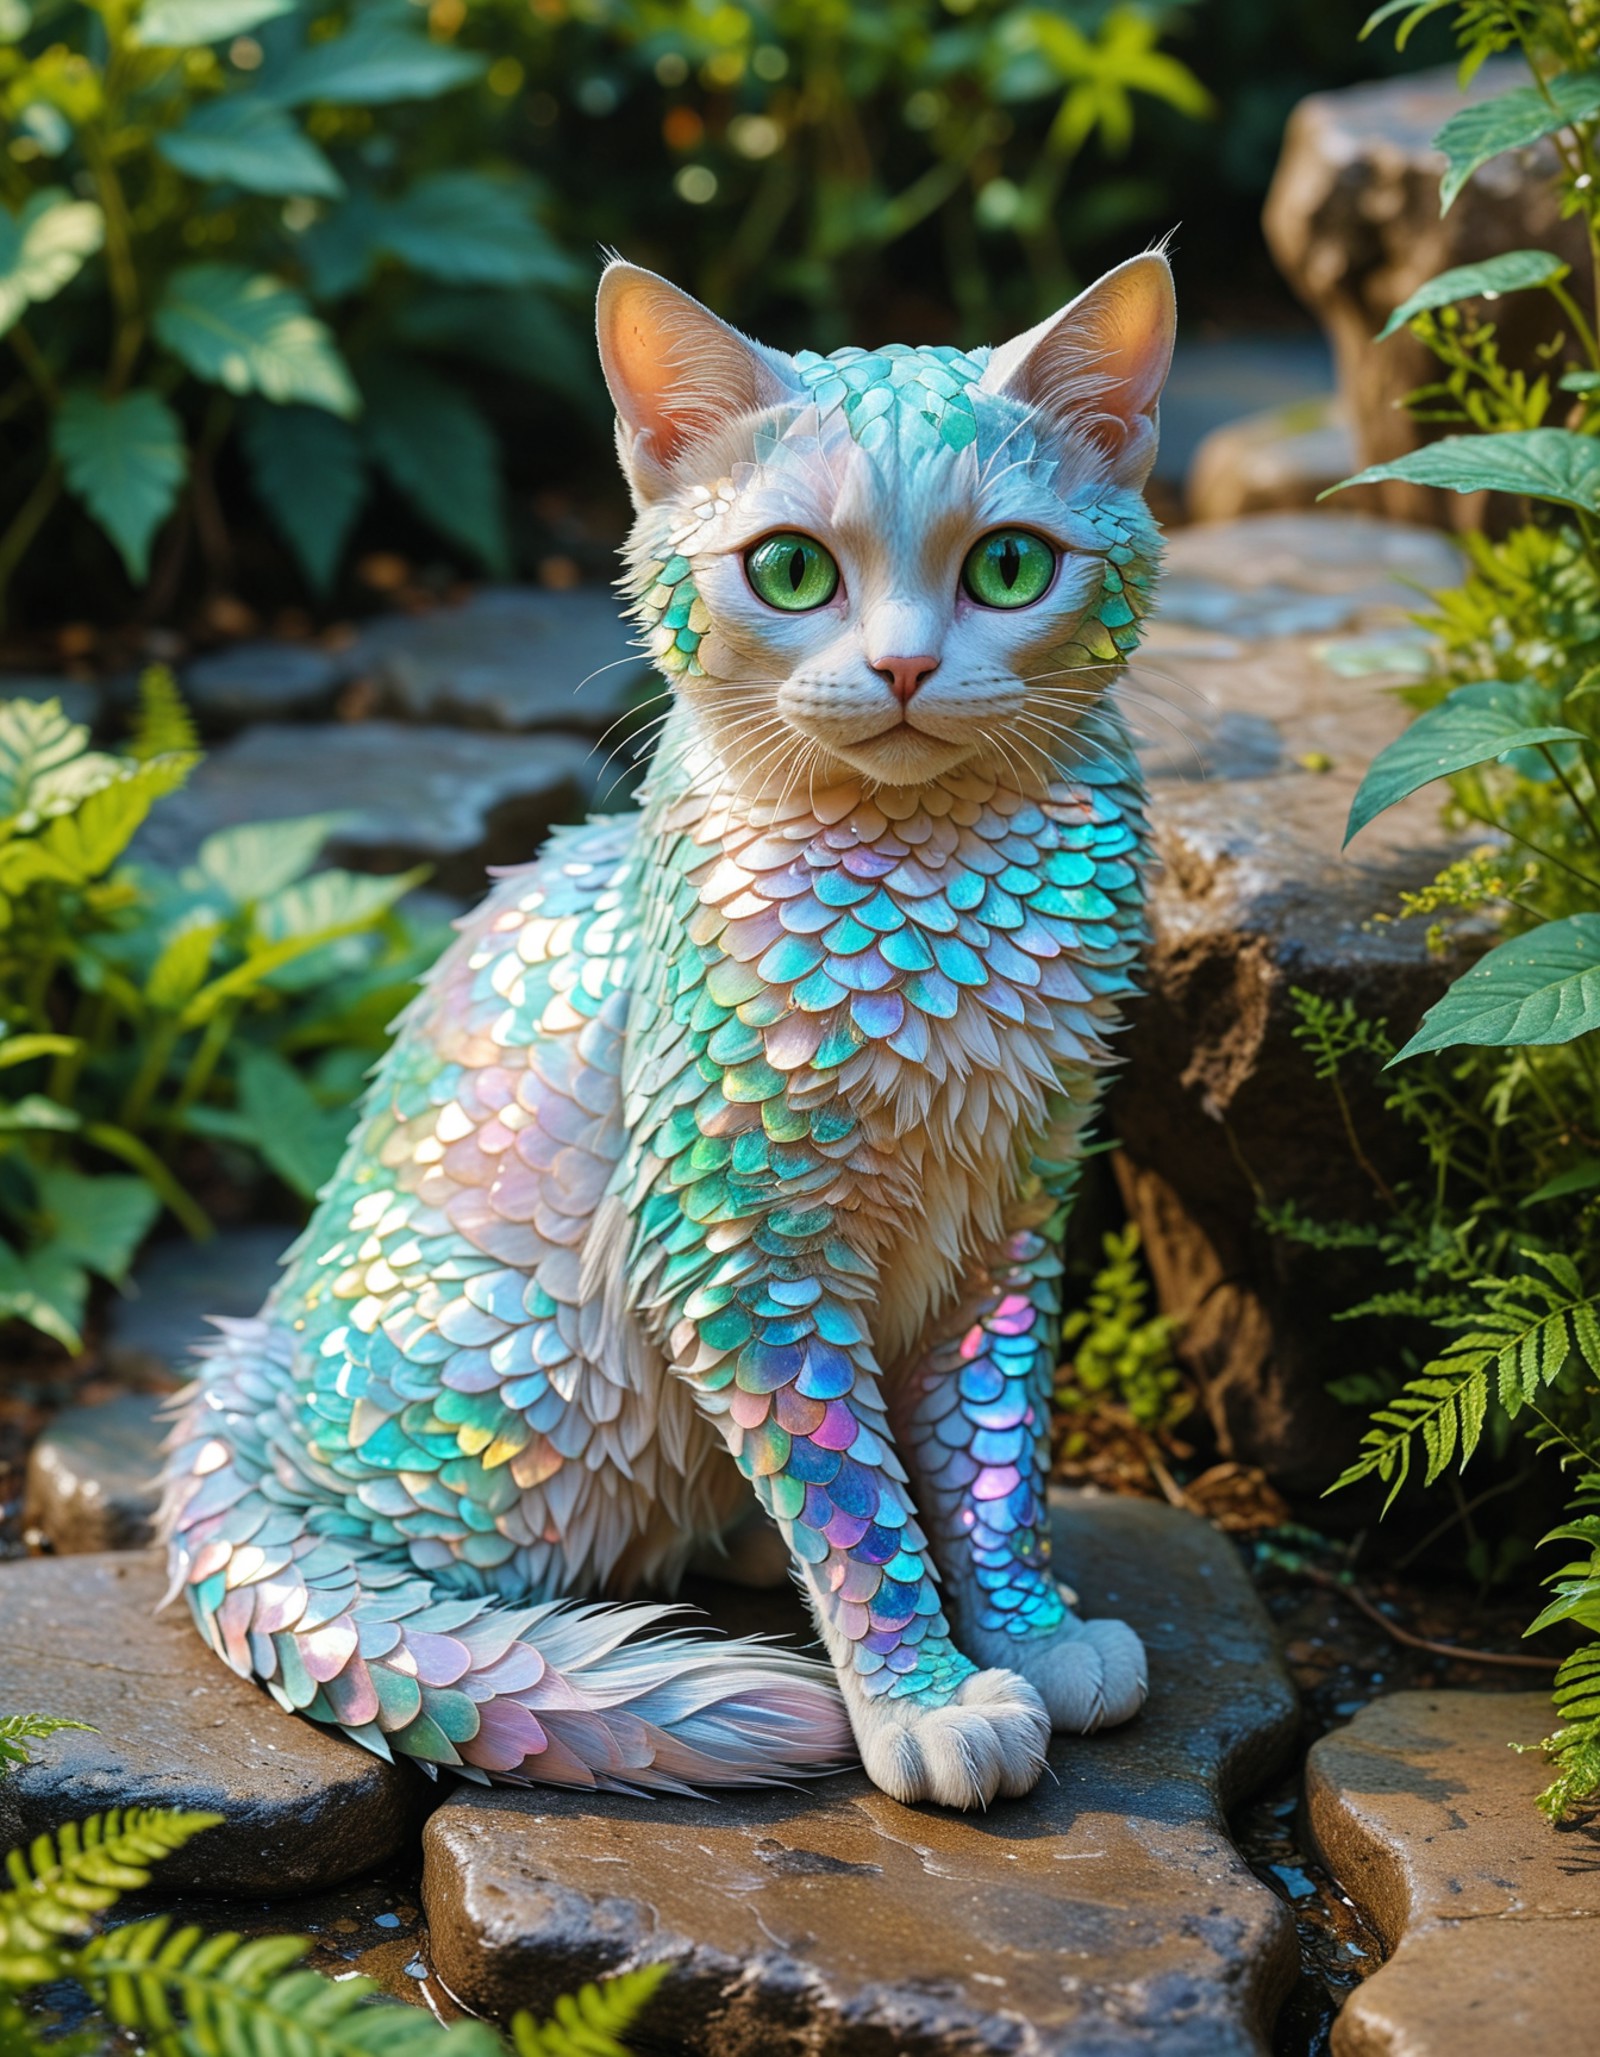 A cat with an unusual coat of colorful, iridescent scales, sitting on a stone path surrounded by lush greenery. The cat’s eyes are strikingly vivid and emerald green, which contrasts with the pastel hues of its scales. 